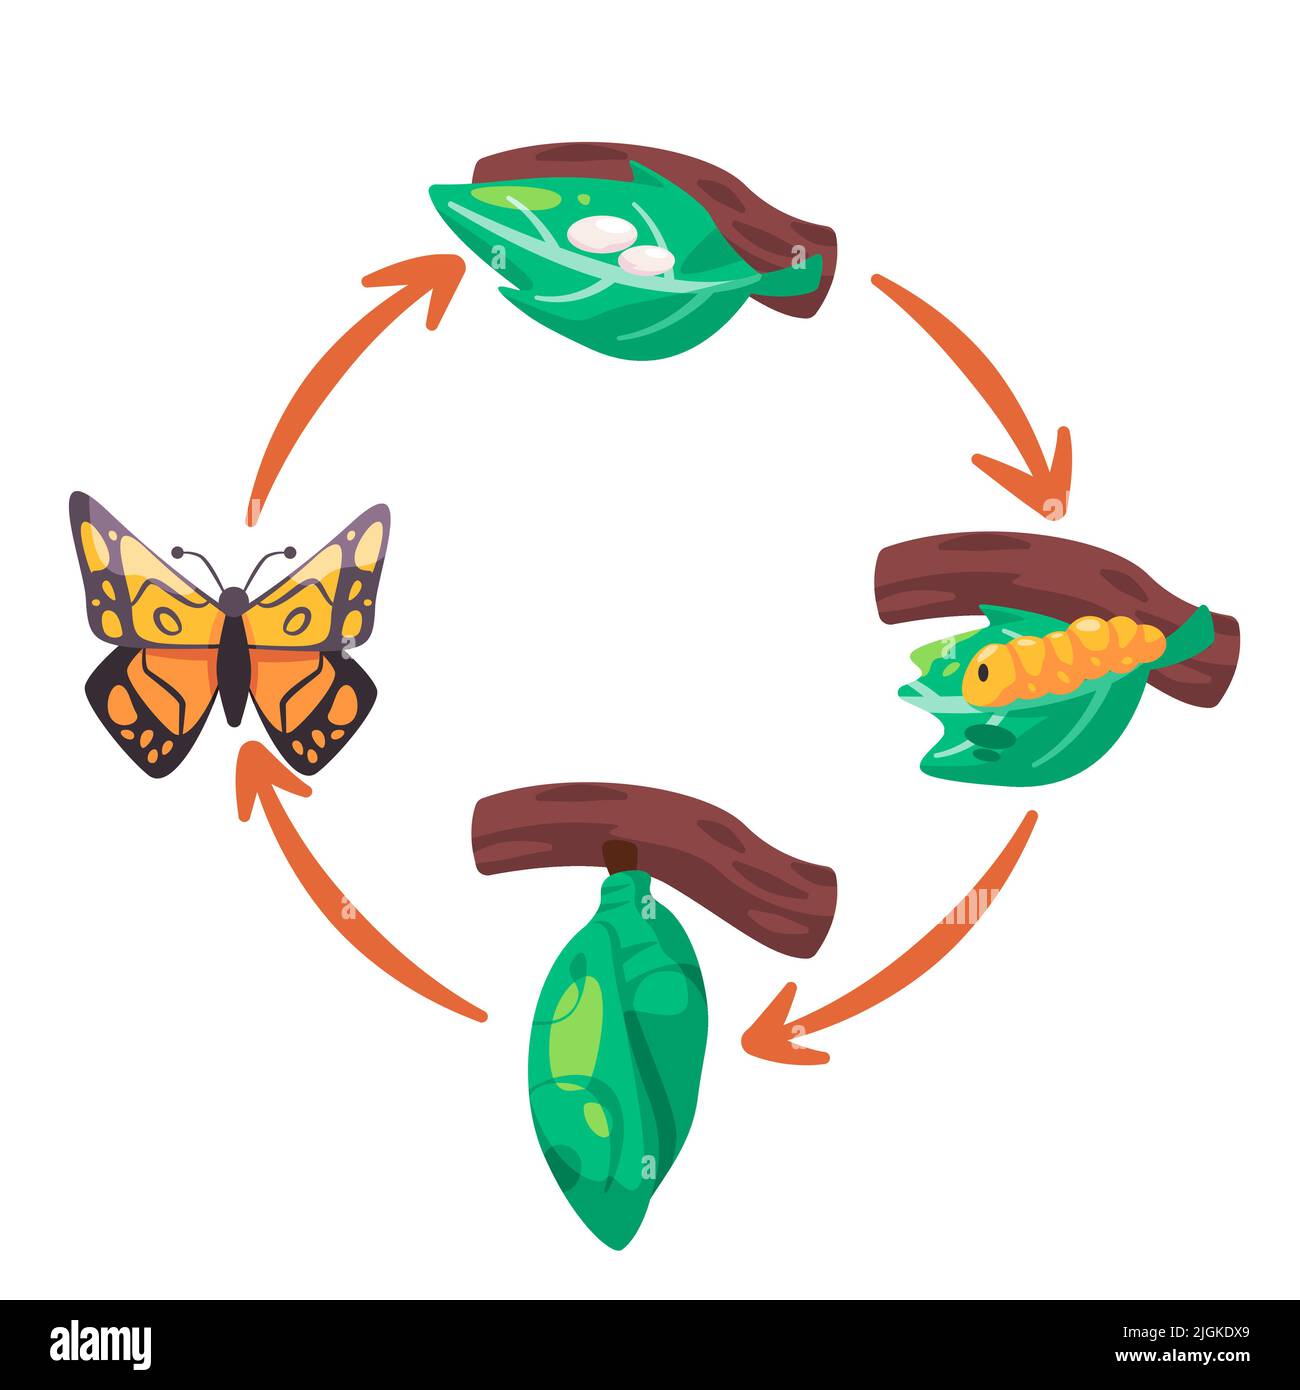 Butterfly life cycle illustration transformation from egg larva pupa cocoon process diagram Stock Vector